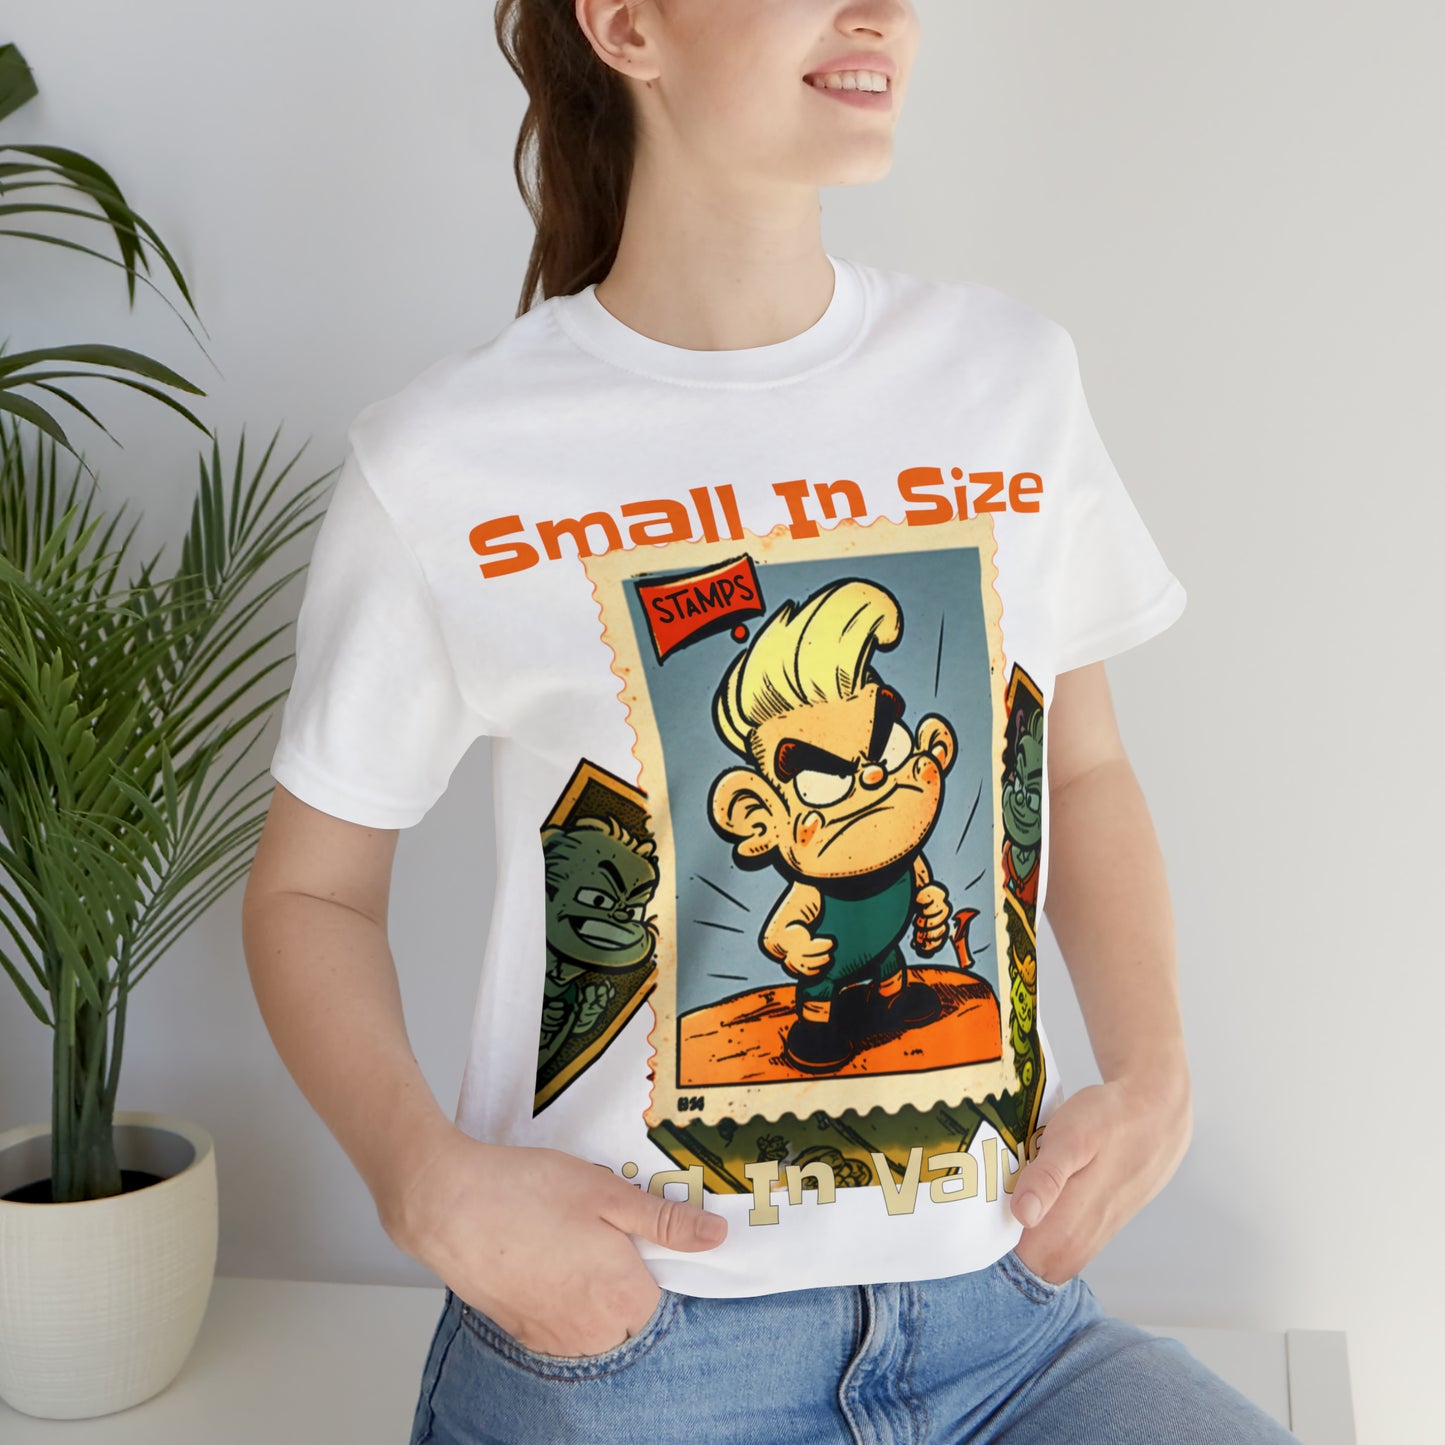 Small In Size Big In Value Stamp Collecting Enthusiast T-Shirt